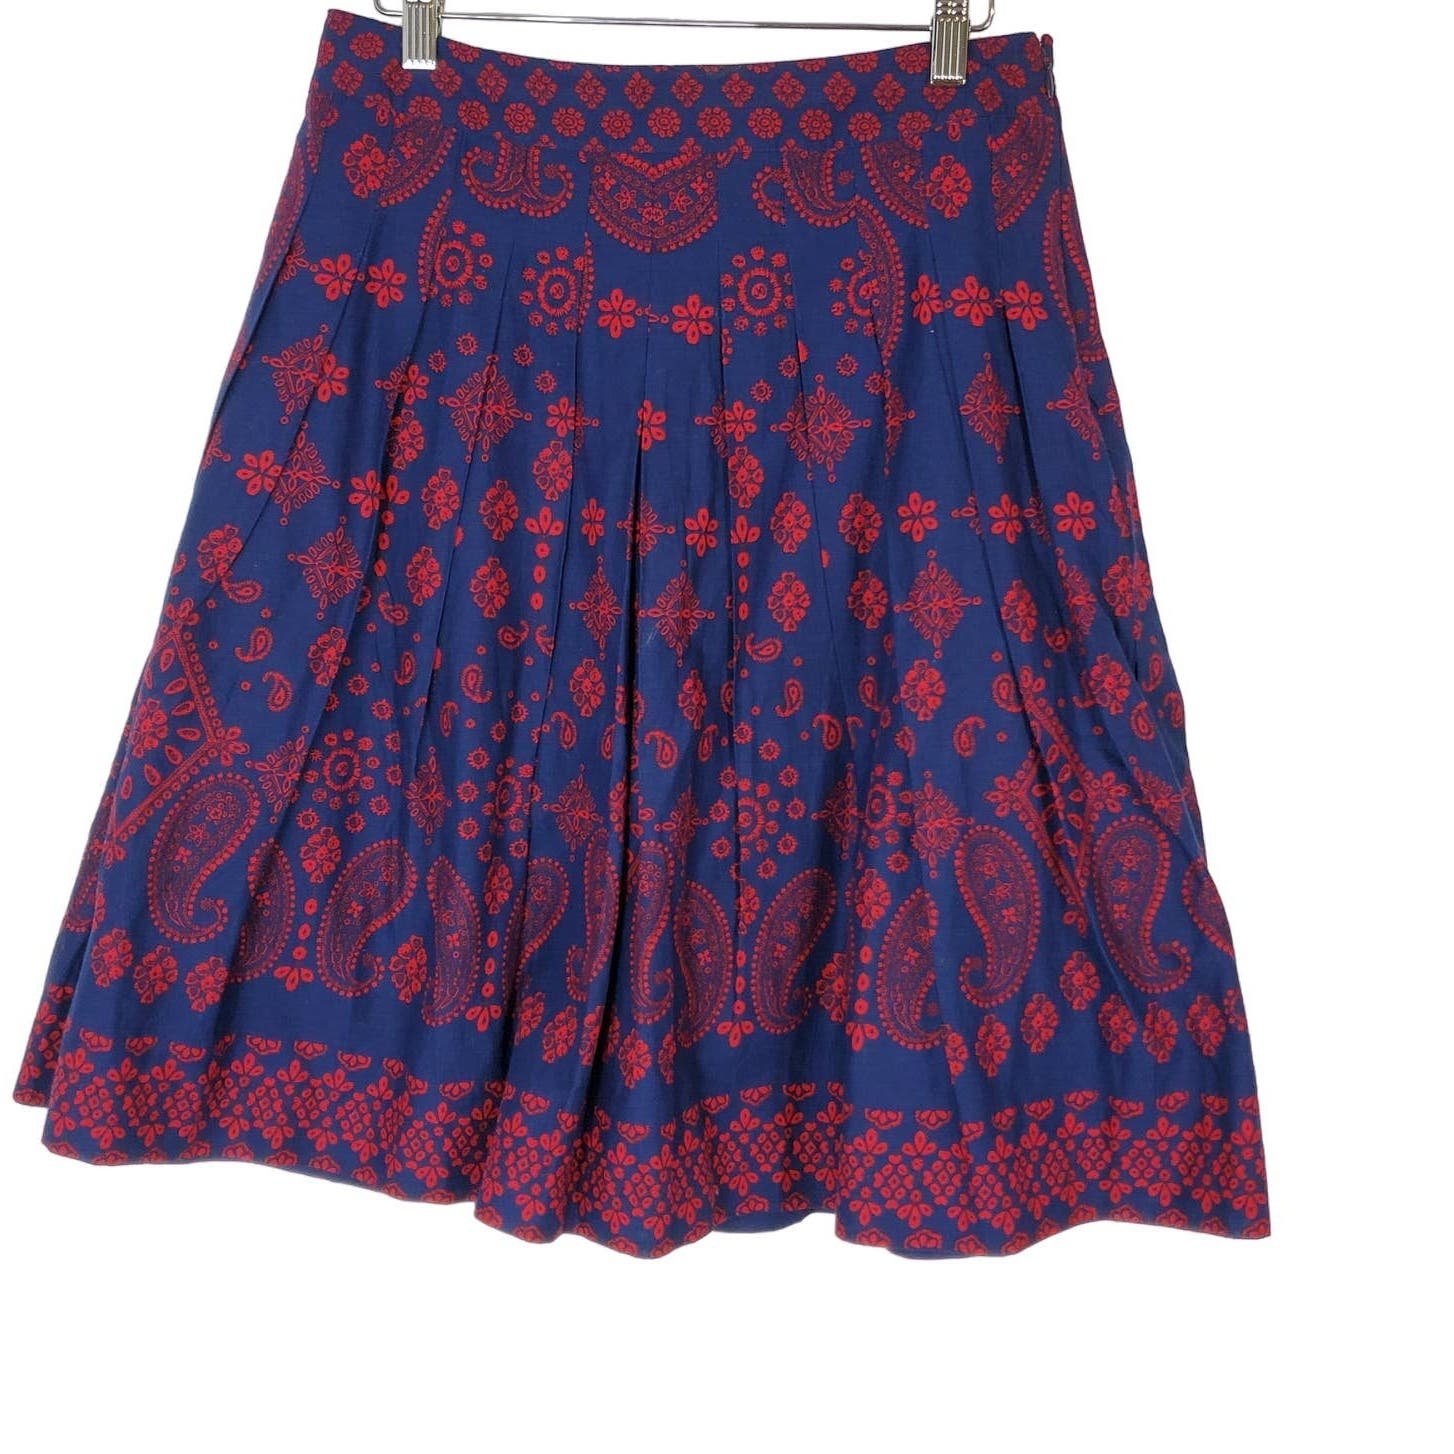 big discount Talbots Blue Red Paisley Pleated Side Zipper Cotton Skirt Womens Size 4 io3C7zaaW Hot Sale